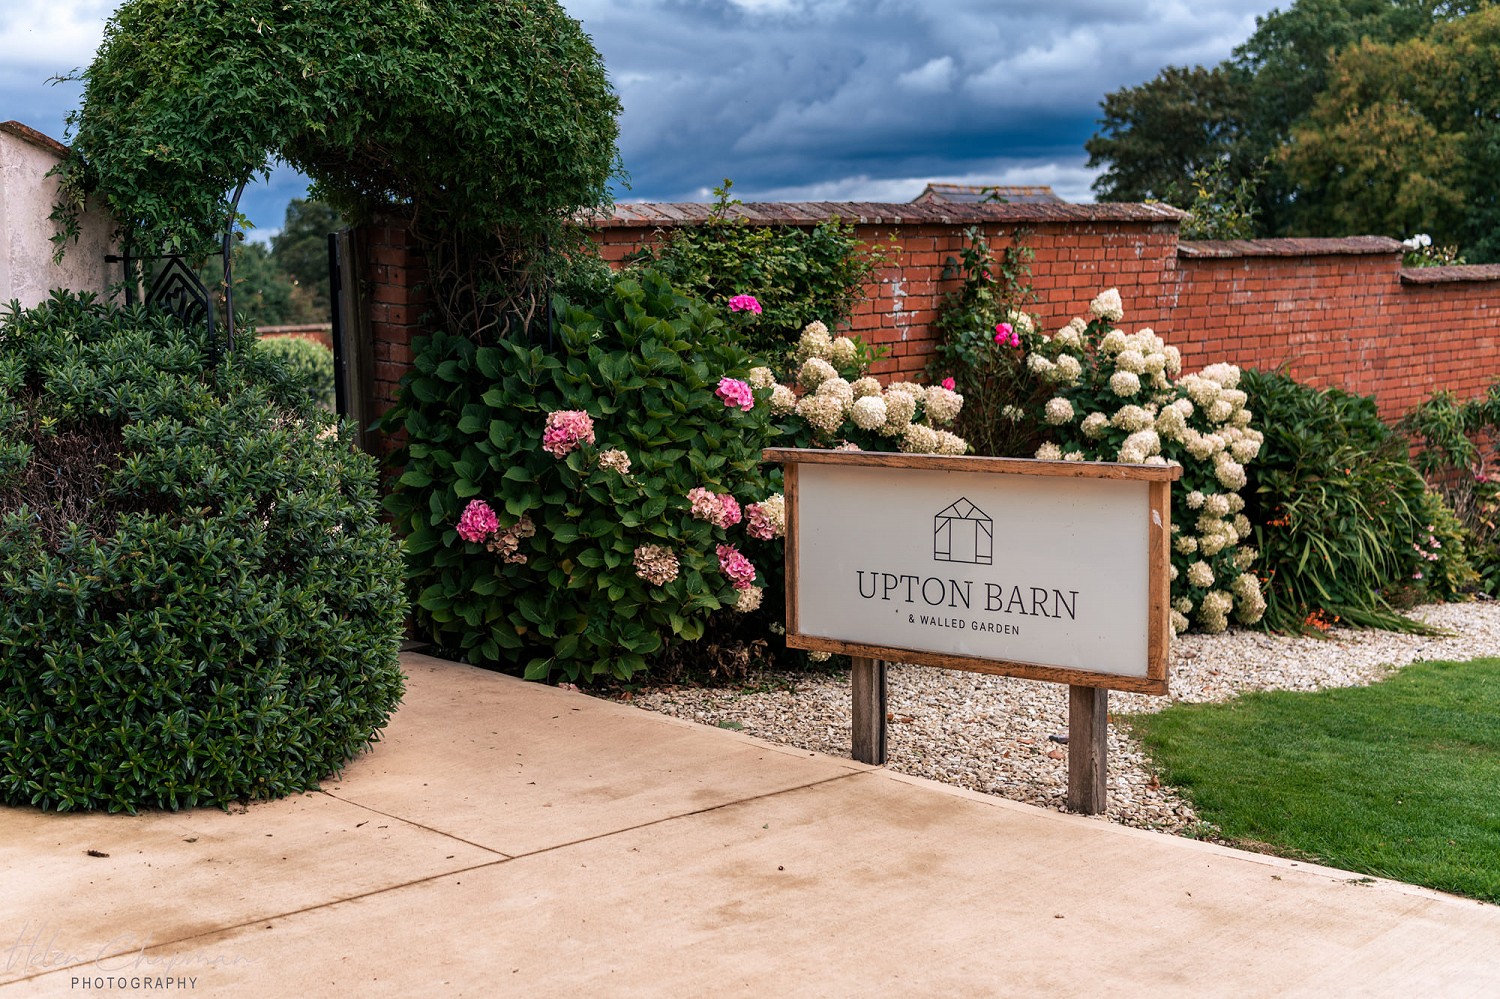 A sign reading "upton barn" in front of a garden with colorful hydrangeas and well-manicured shrubs, set against a rustic brick wall under a cloudy sky.